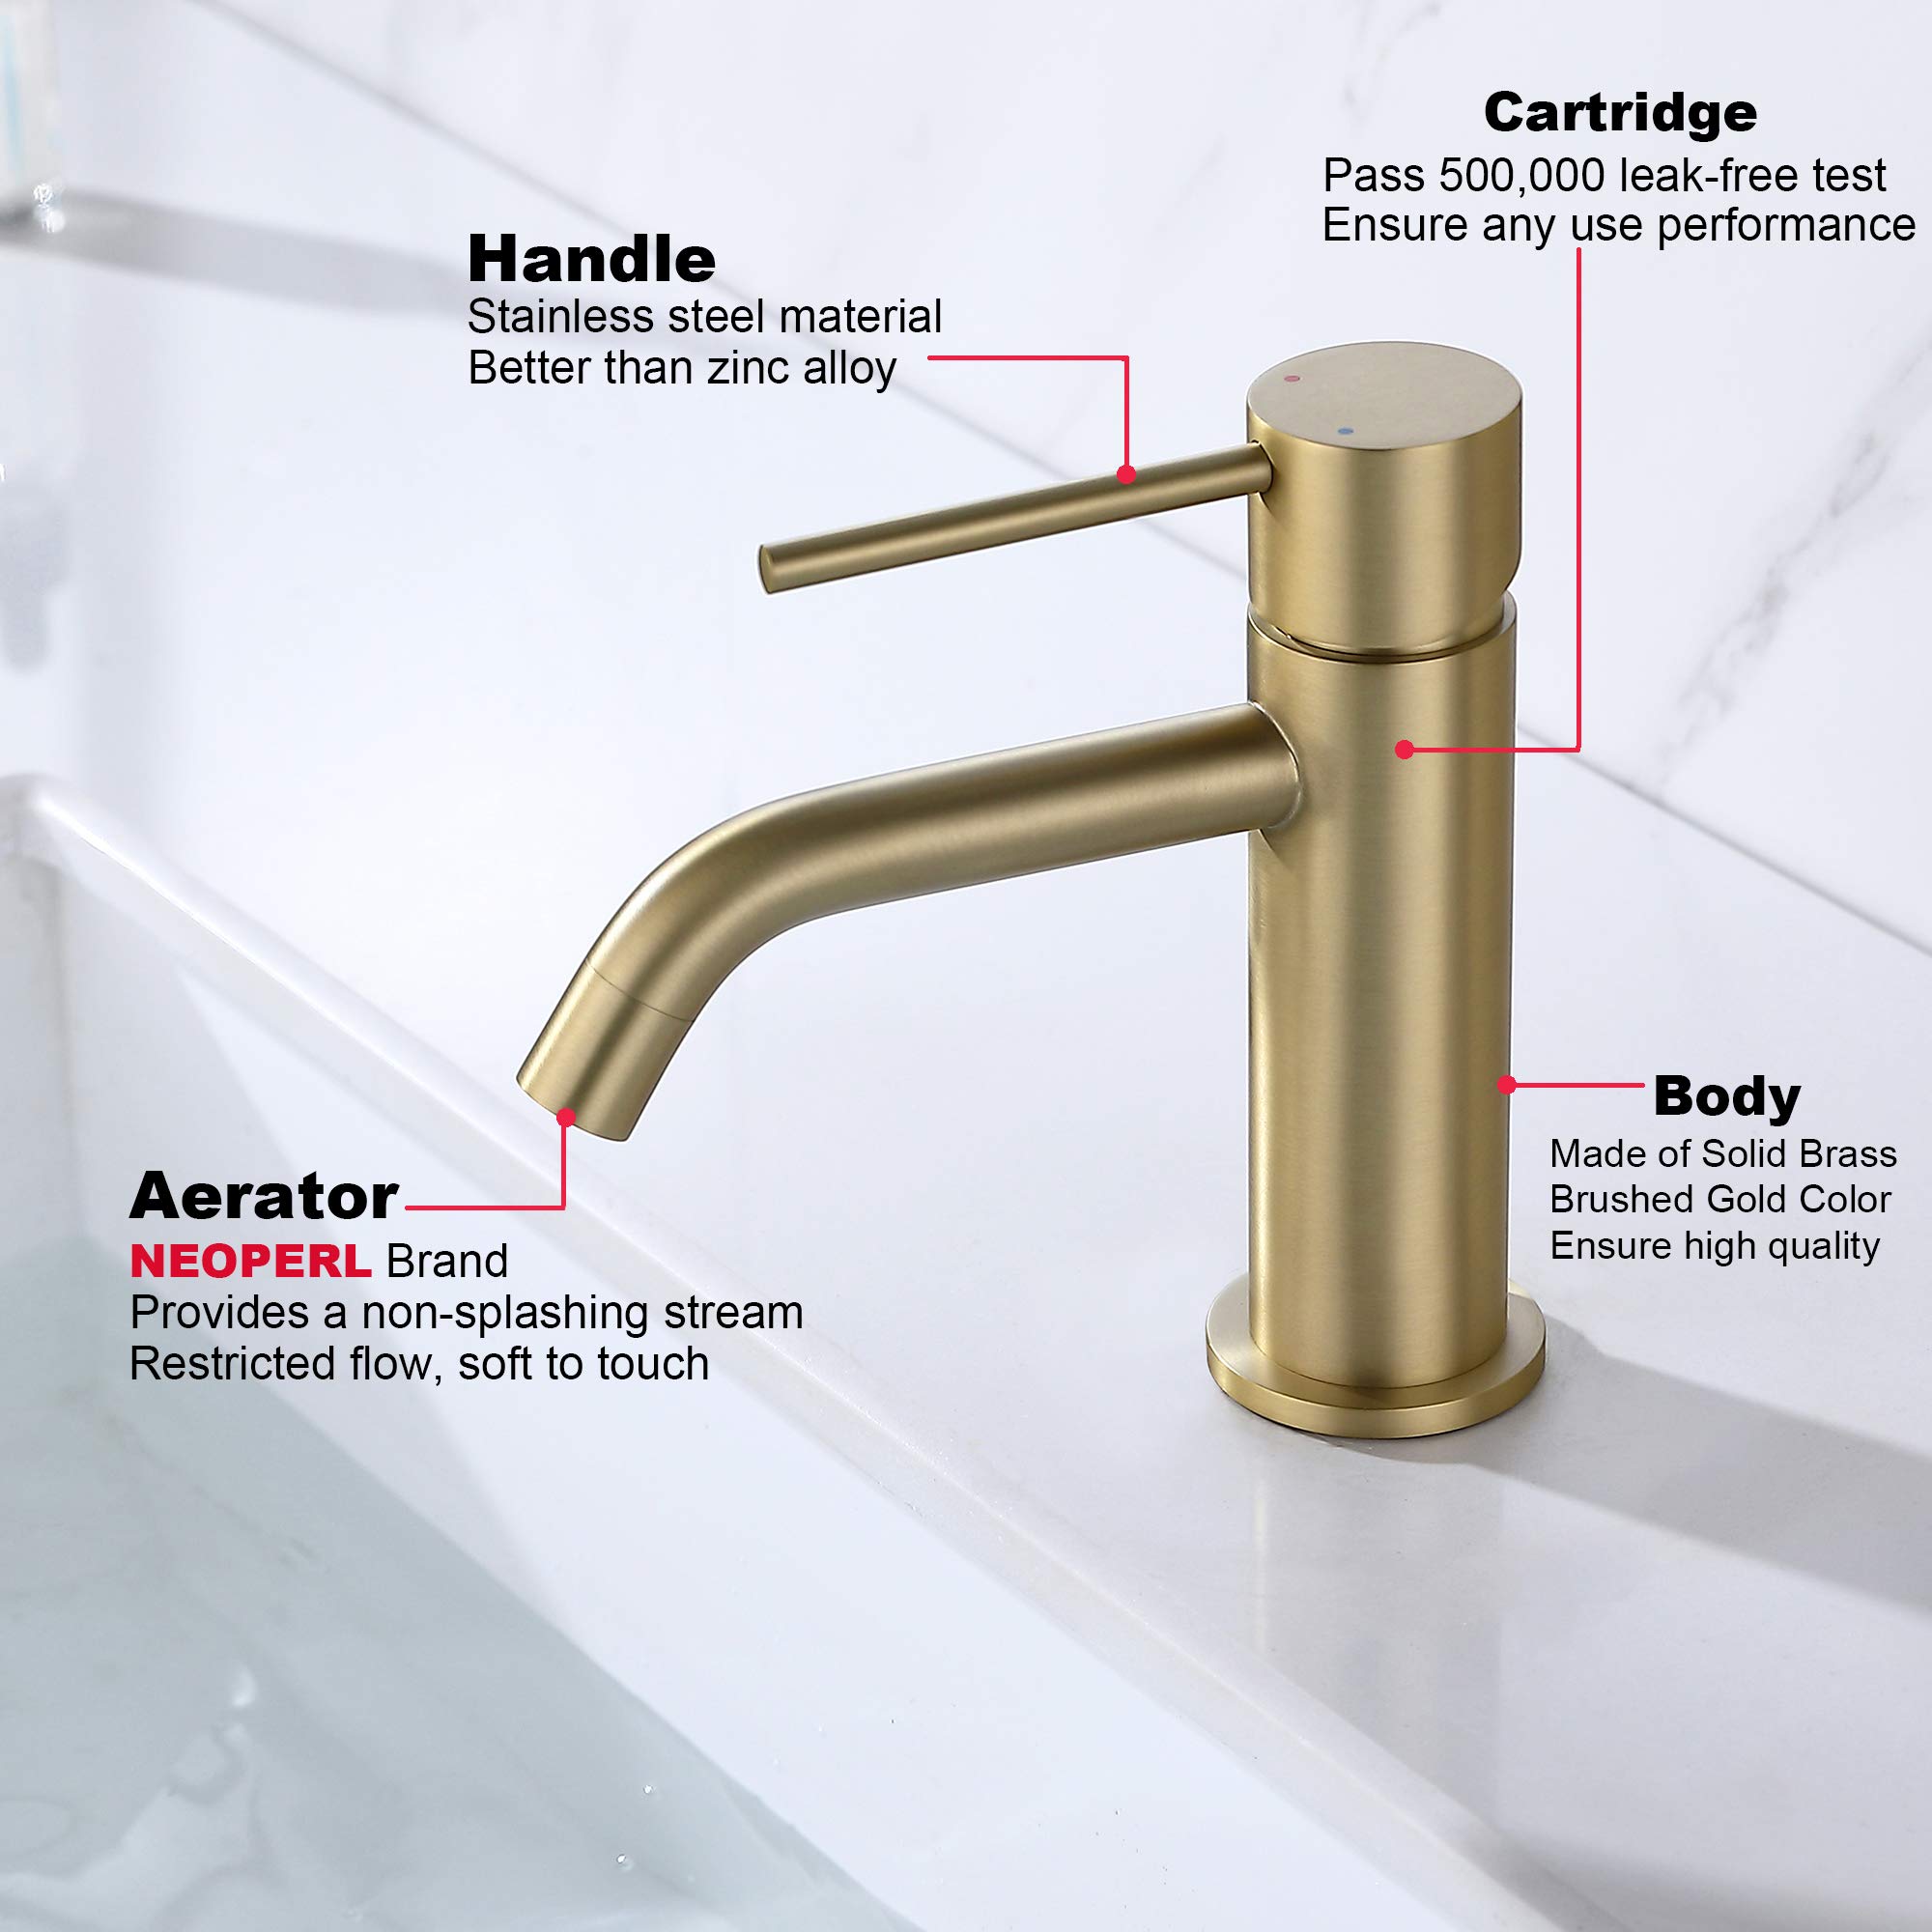 JXMMP Brushed Gold Bathroom Faucet, Single Handle Brass Sink Faucet Bathroom Single Hole with Pop Up Sink Drain Assembly and Water Faucet Supply Lines